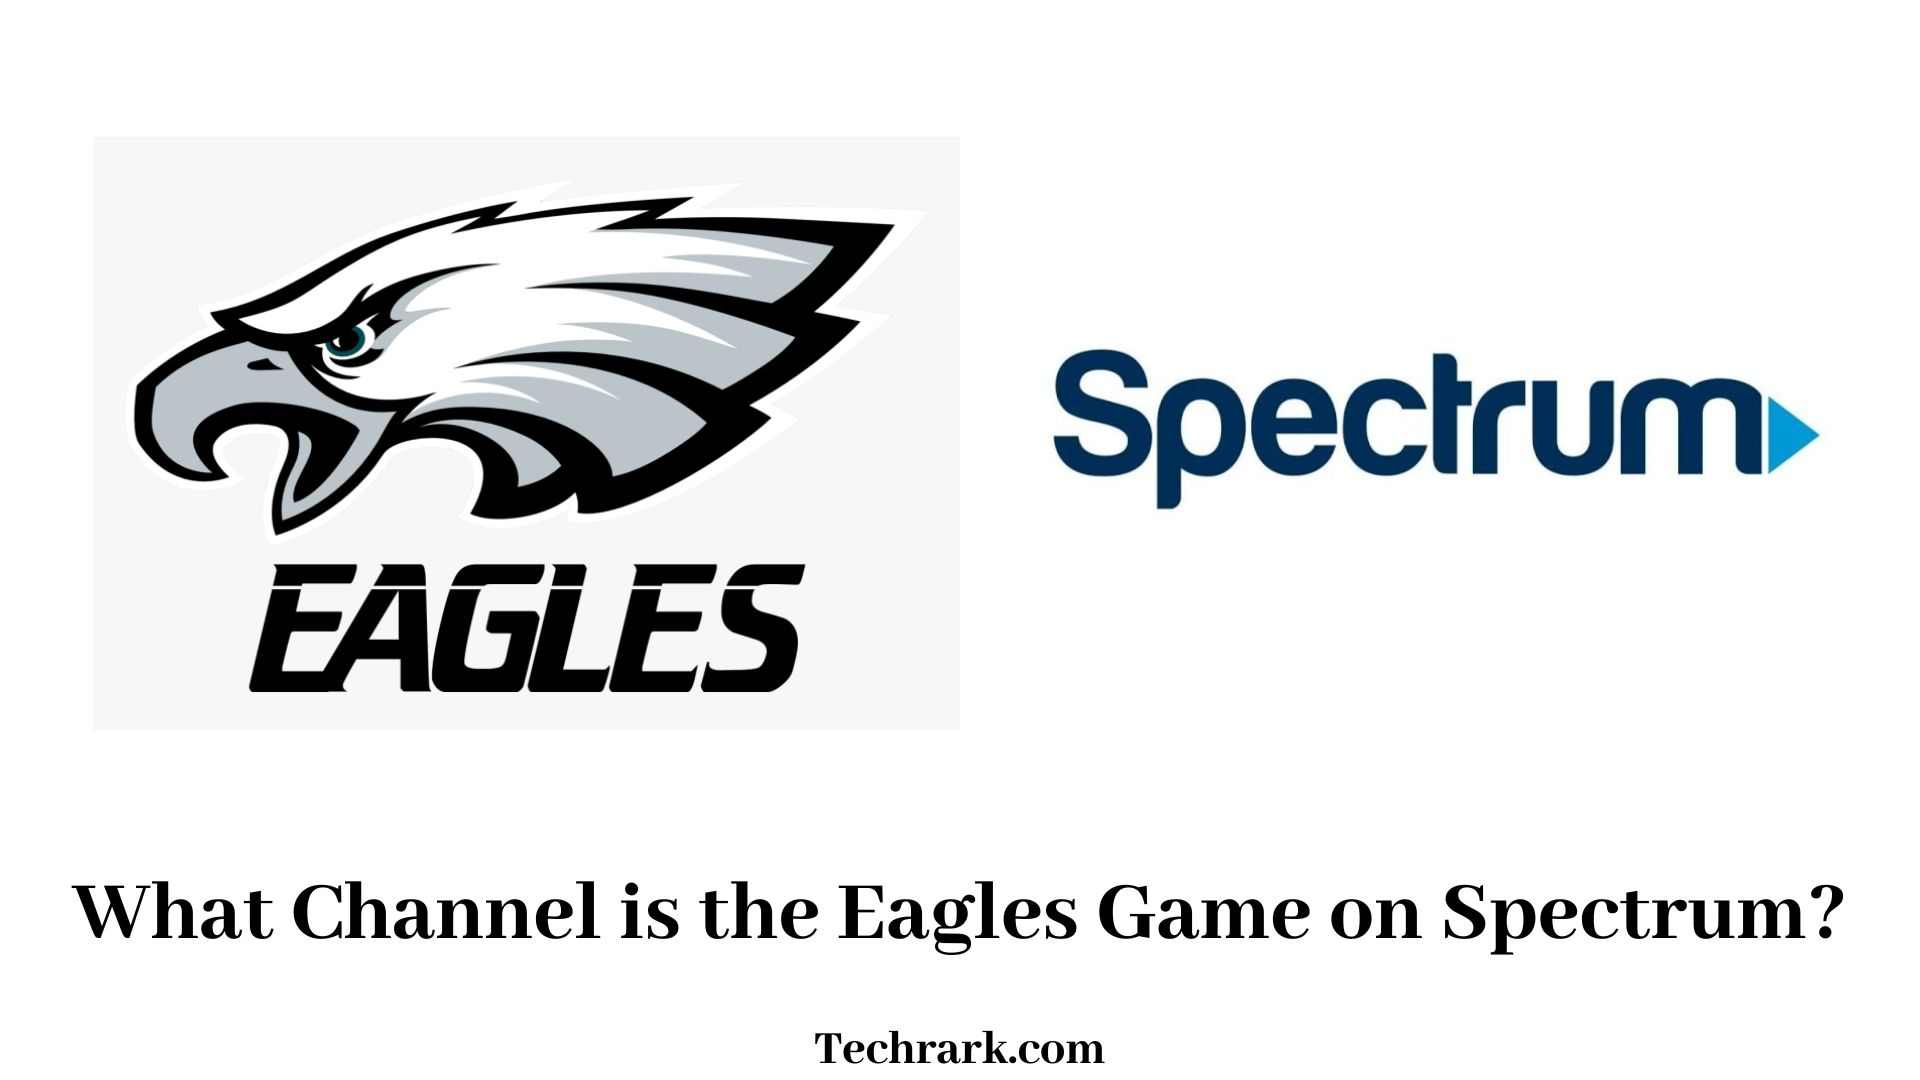 What Channel is the Eagles Game on Spectrum